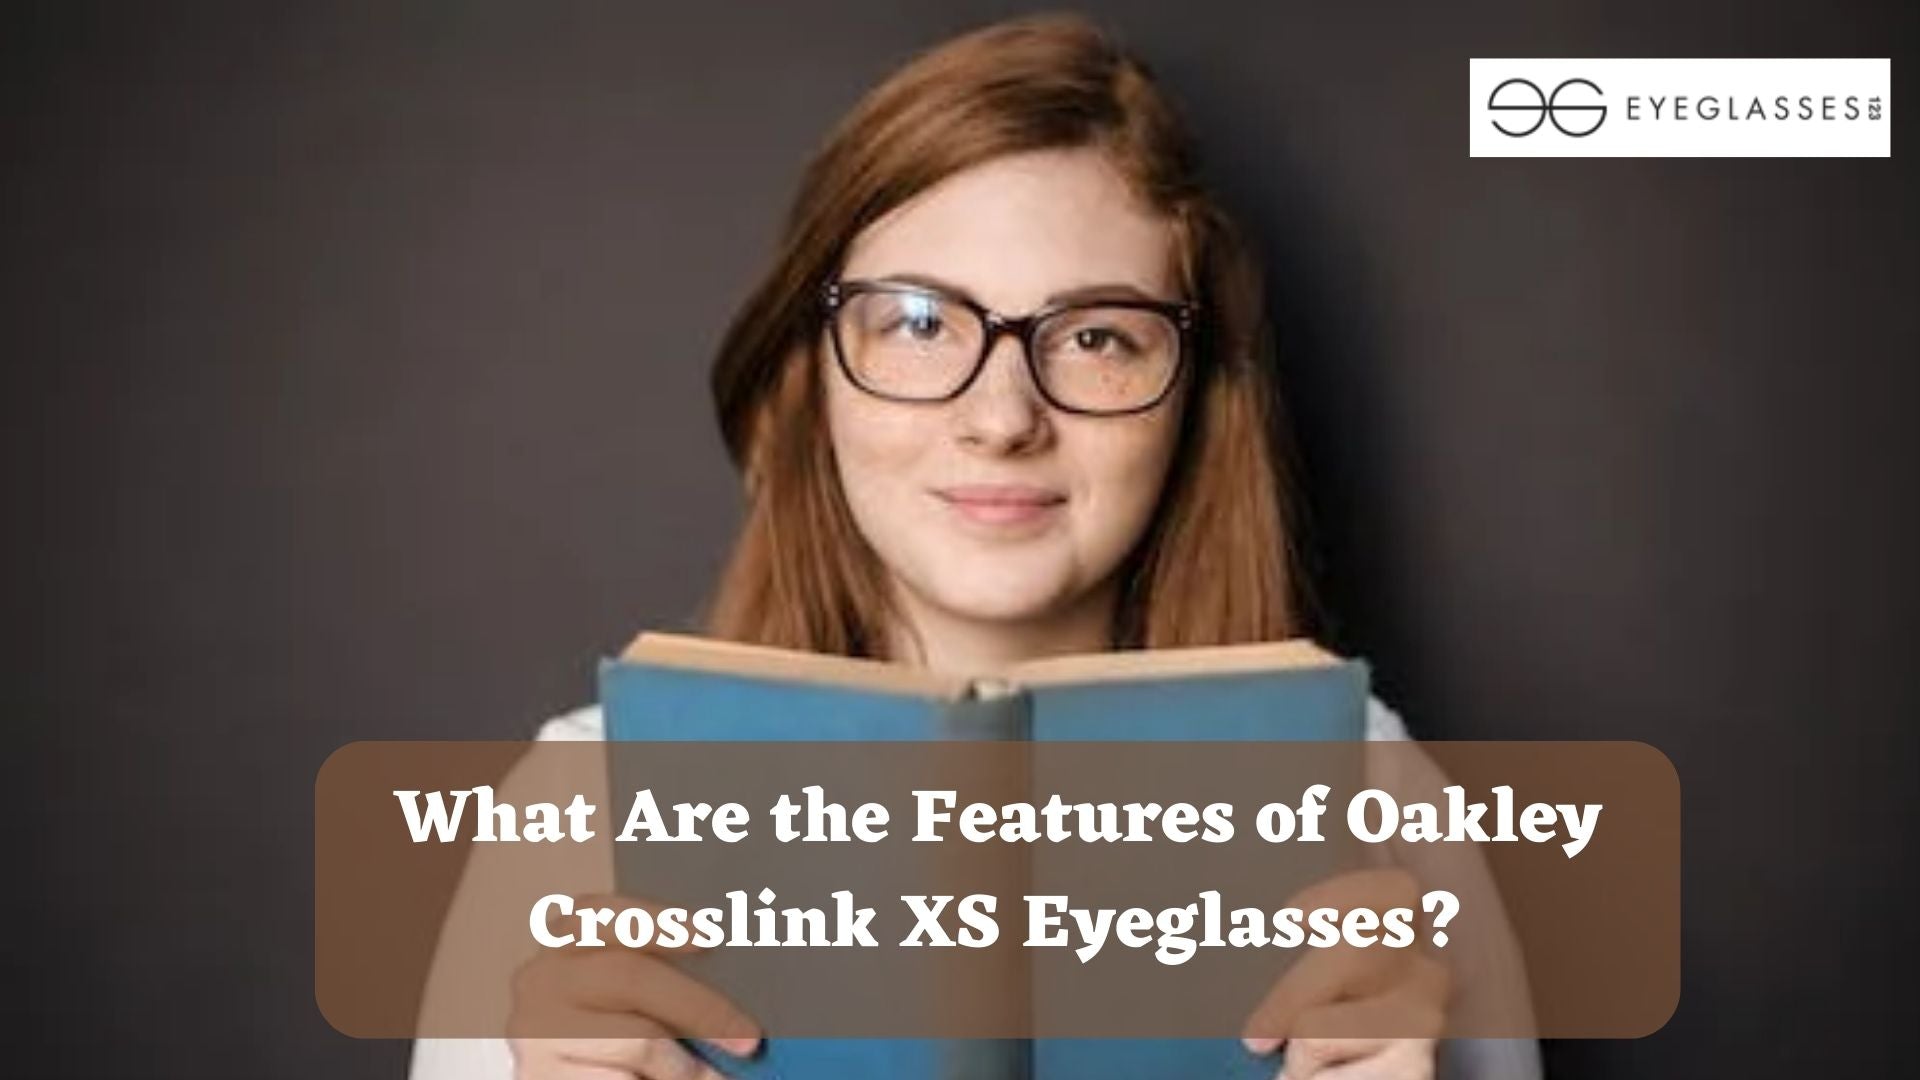 What Are the Features of Oakley Crosslink XS Eyeglasses?